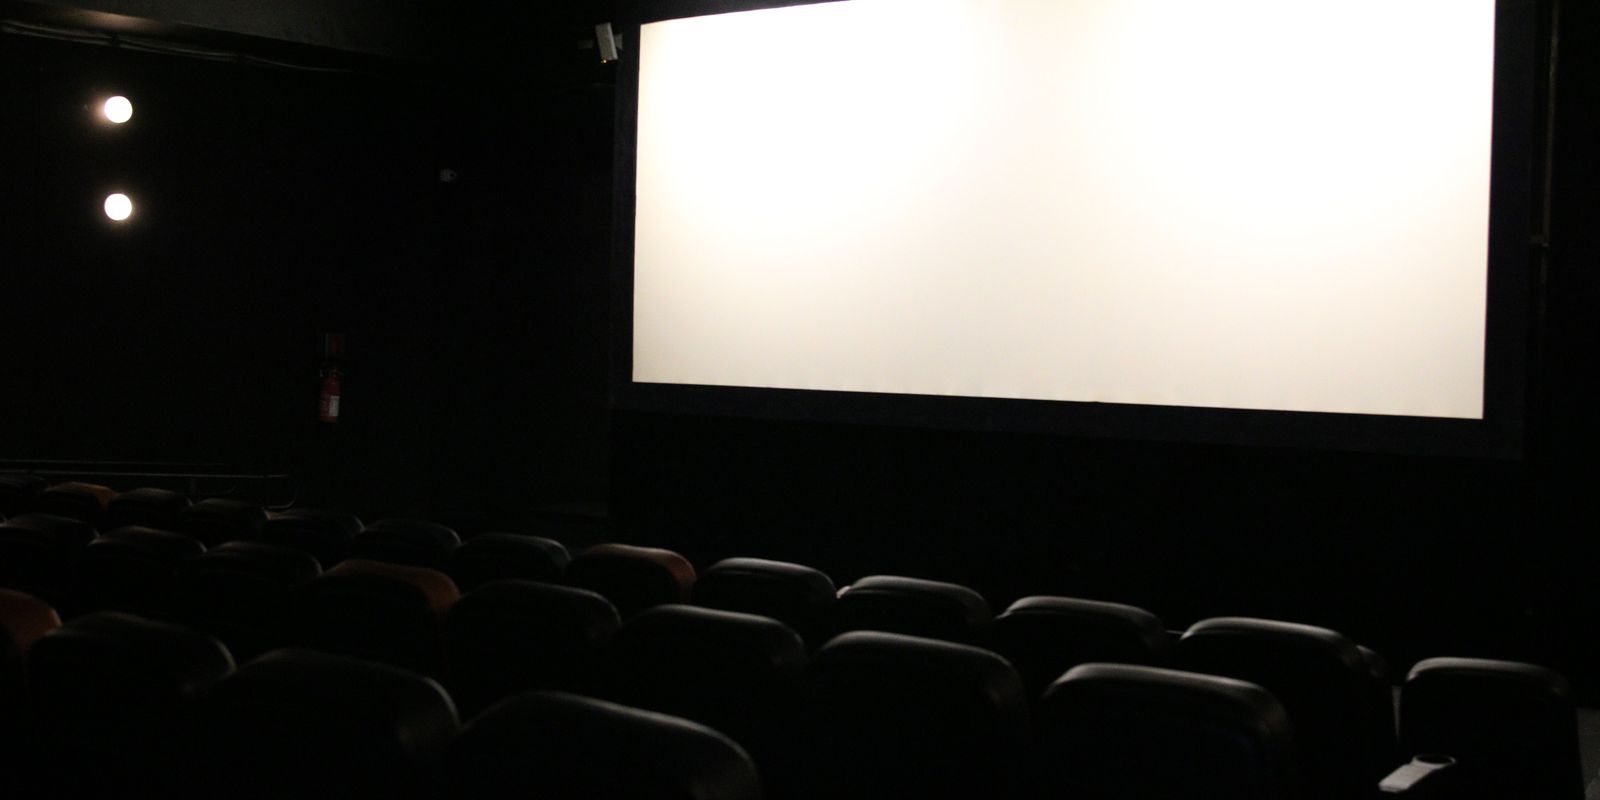 Audiences return to movie theaters in 2022